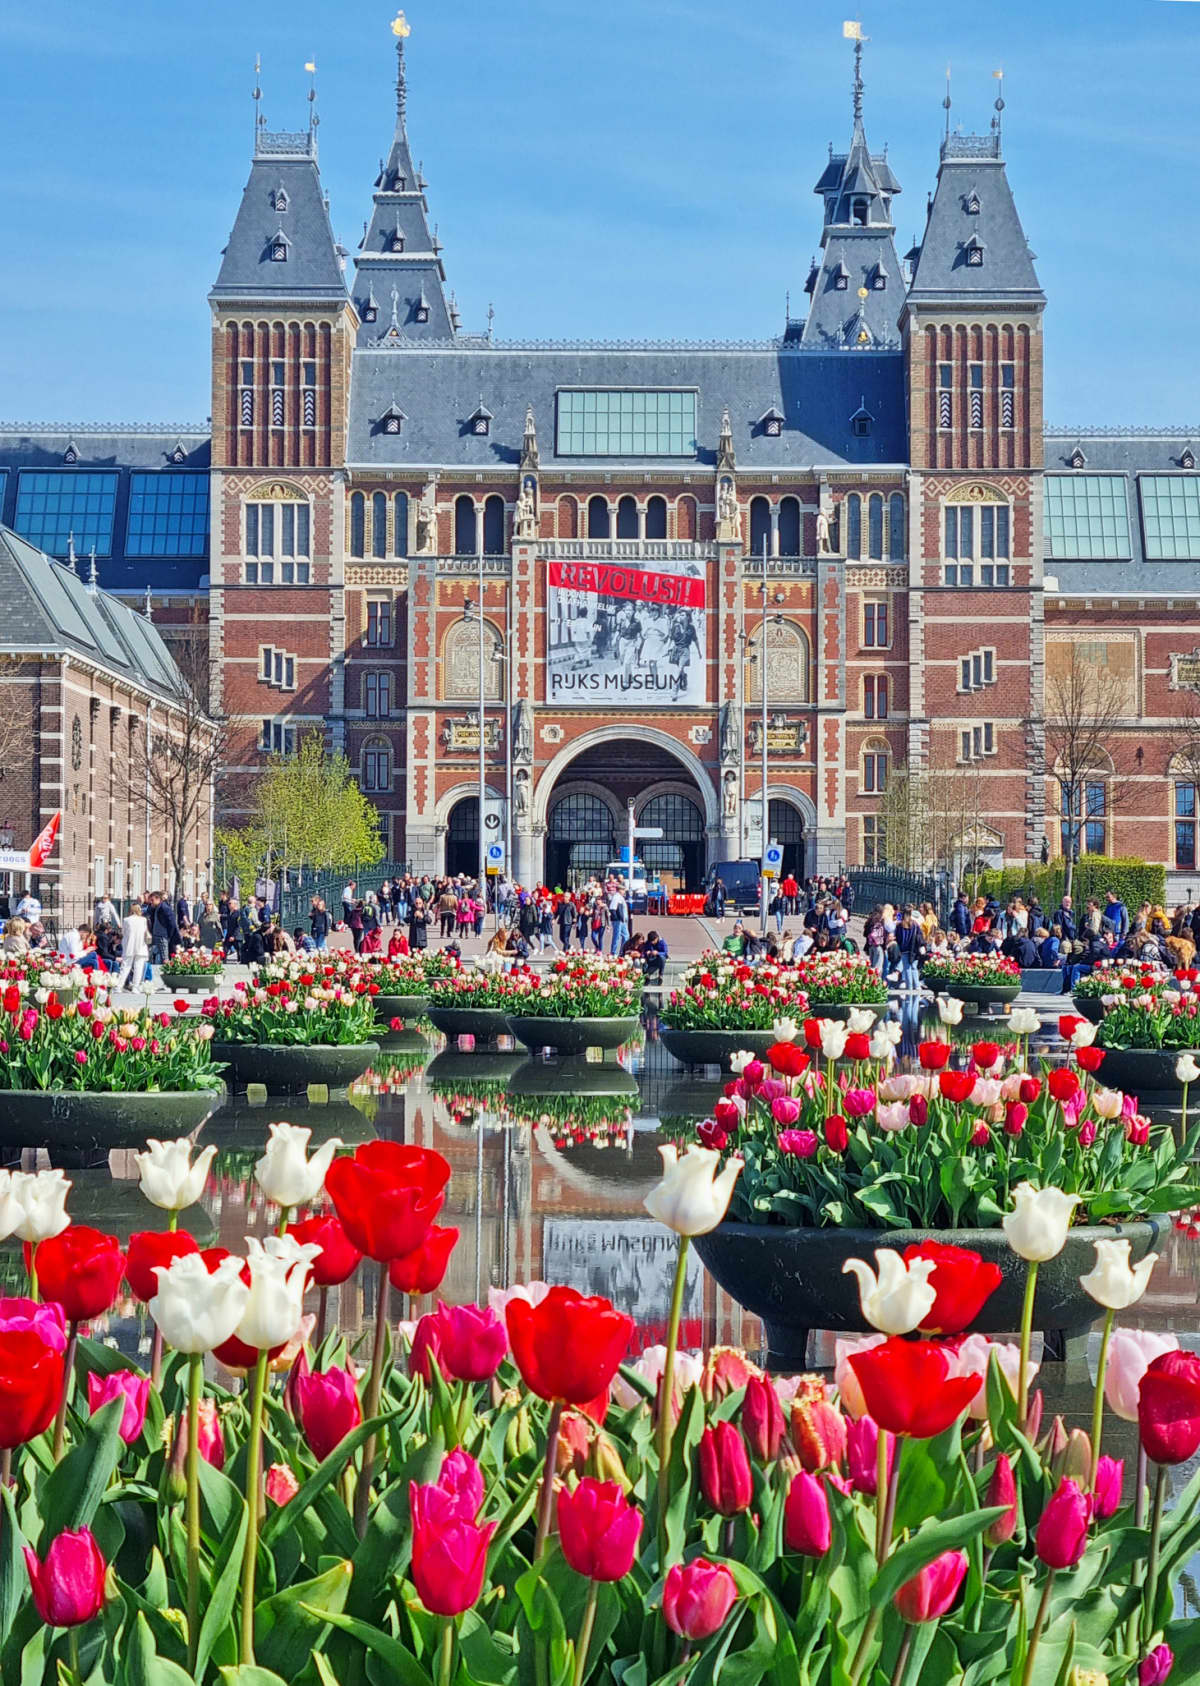 Rijksmuseum on Museumplein with crowds of tourists.